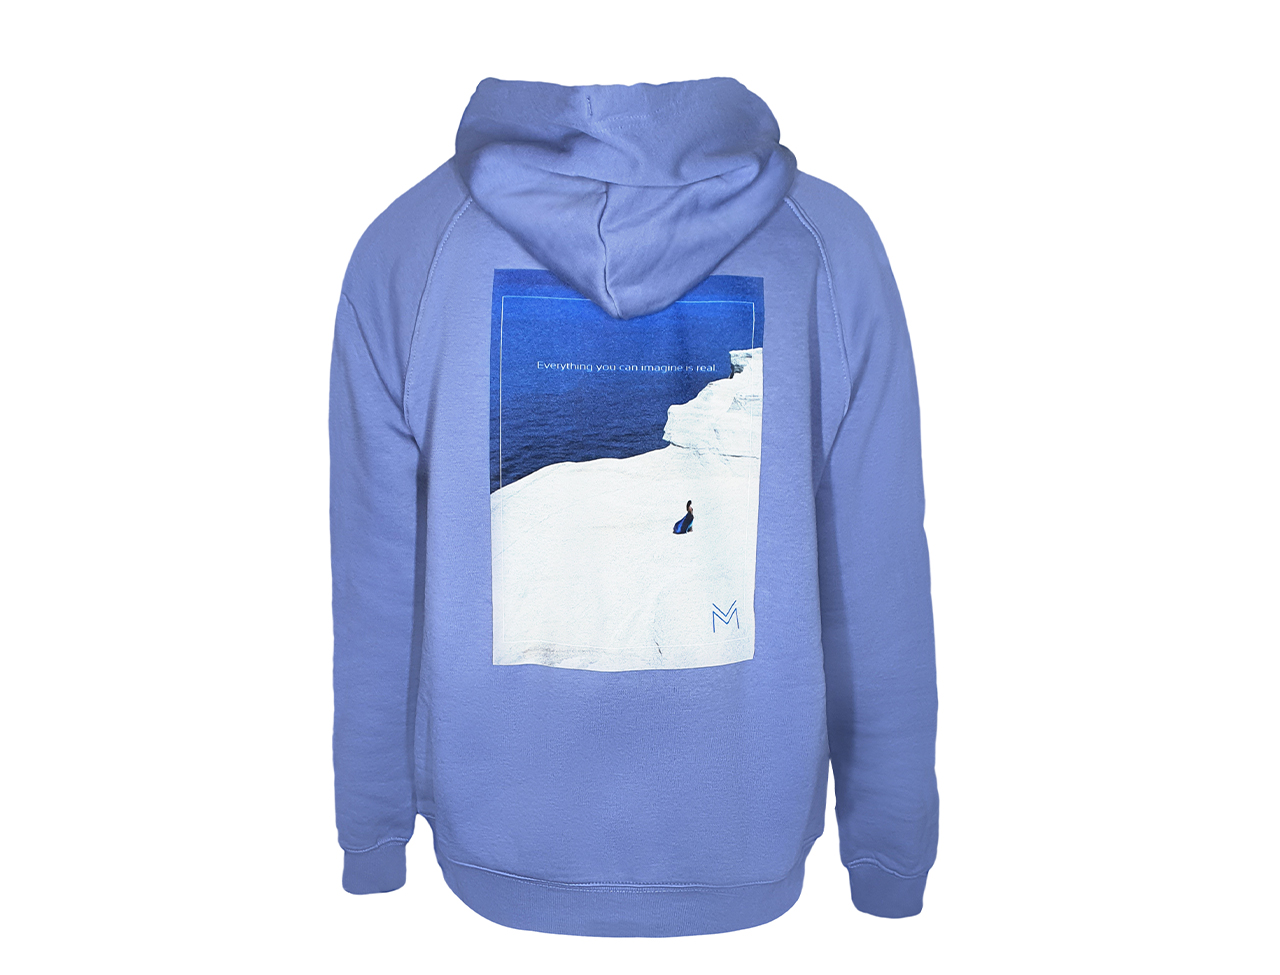 Everything you can imagine is real - Blue Hoodie